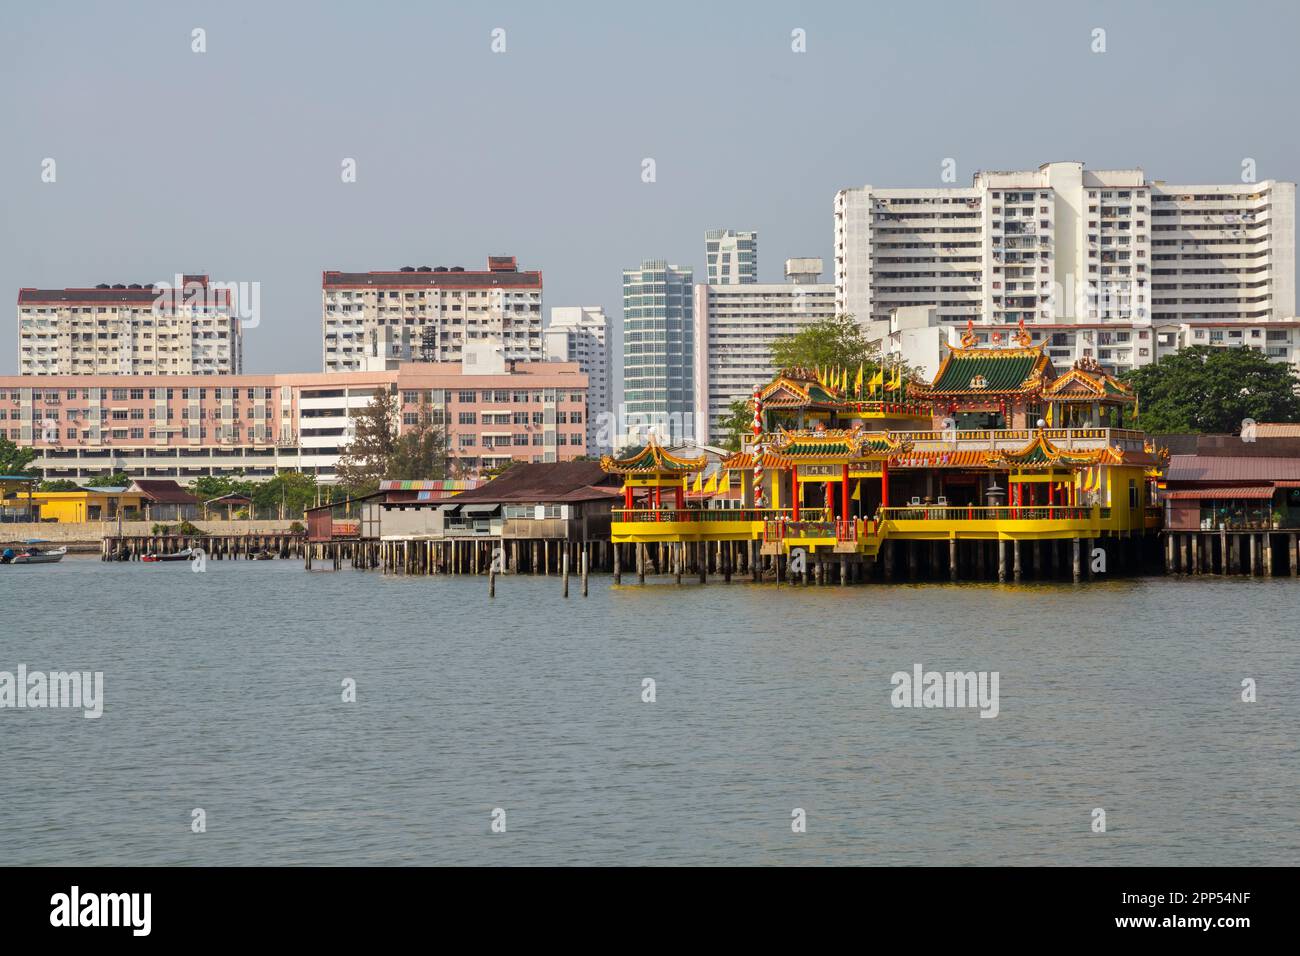 View of  The Floating Temple Of Penang, George Town, Penang Island, Malaysia, Southeast Asia. Stock Photo